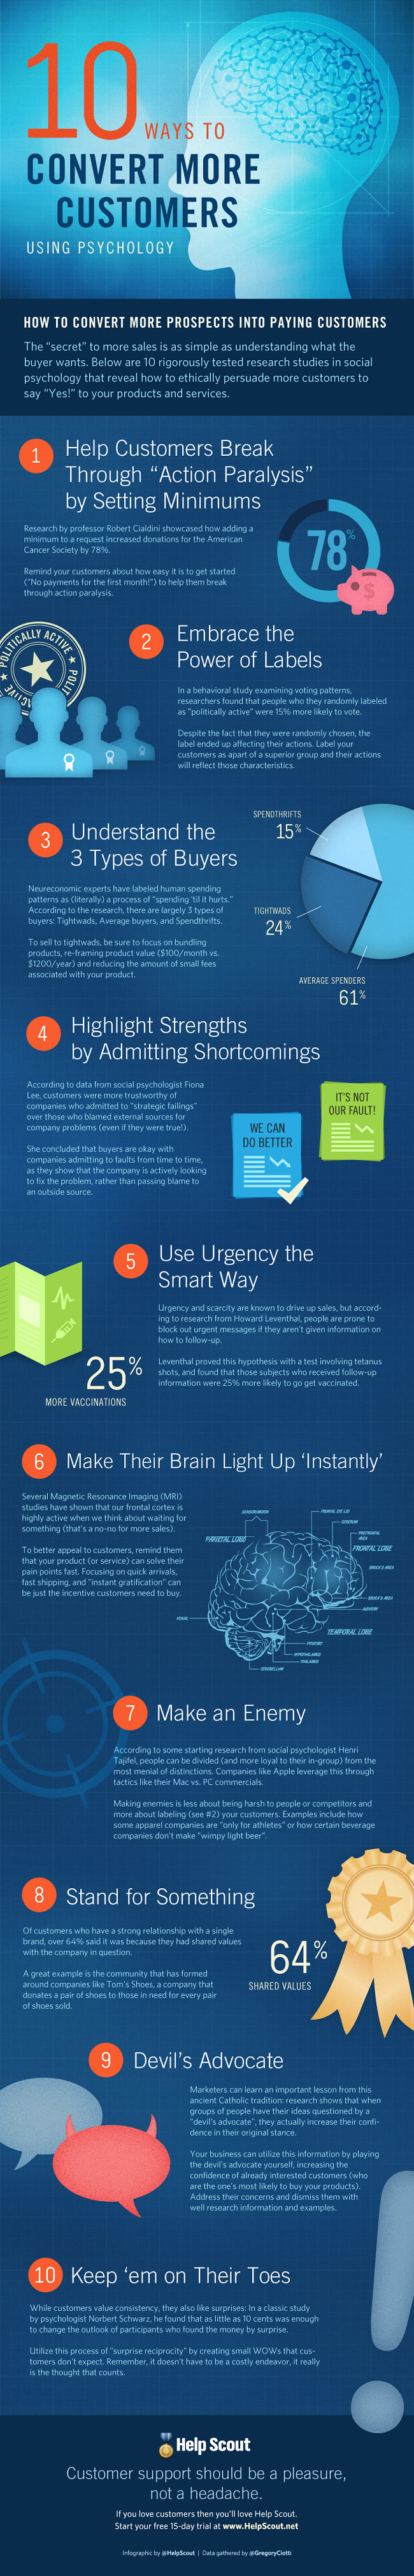 1418158033-10-ways-convert-more-customers-psychology-infographic